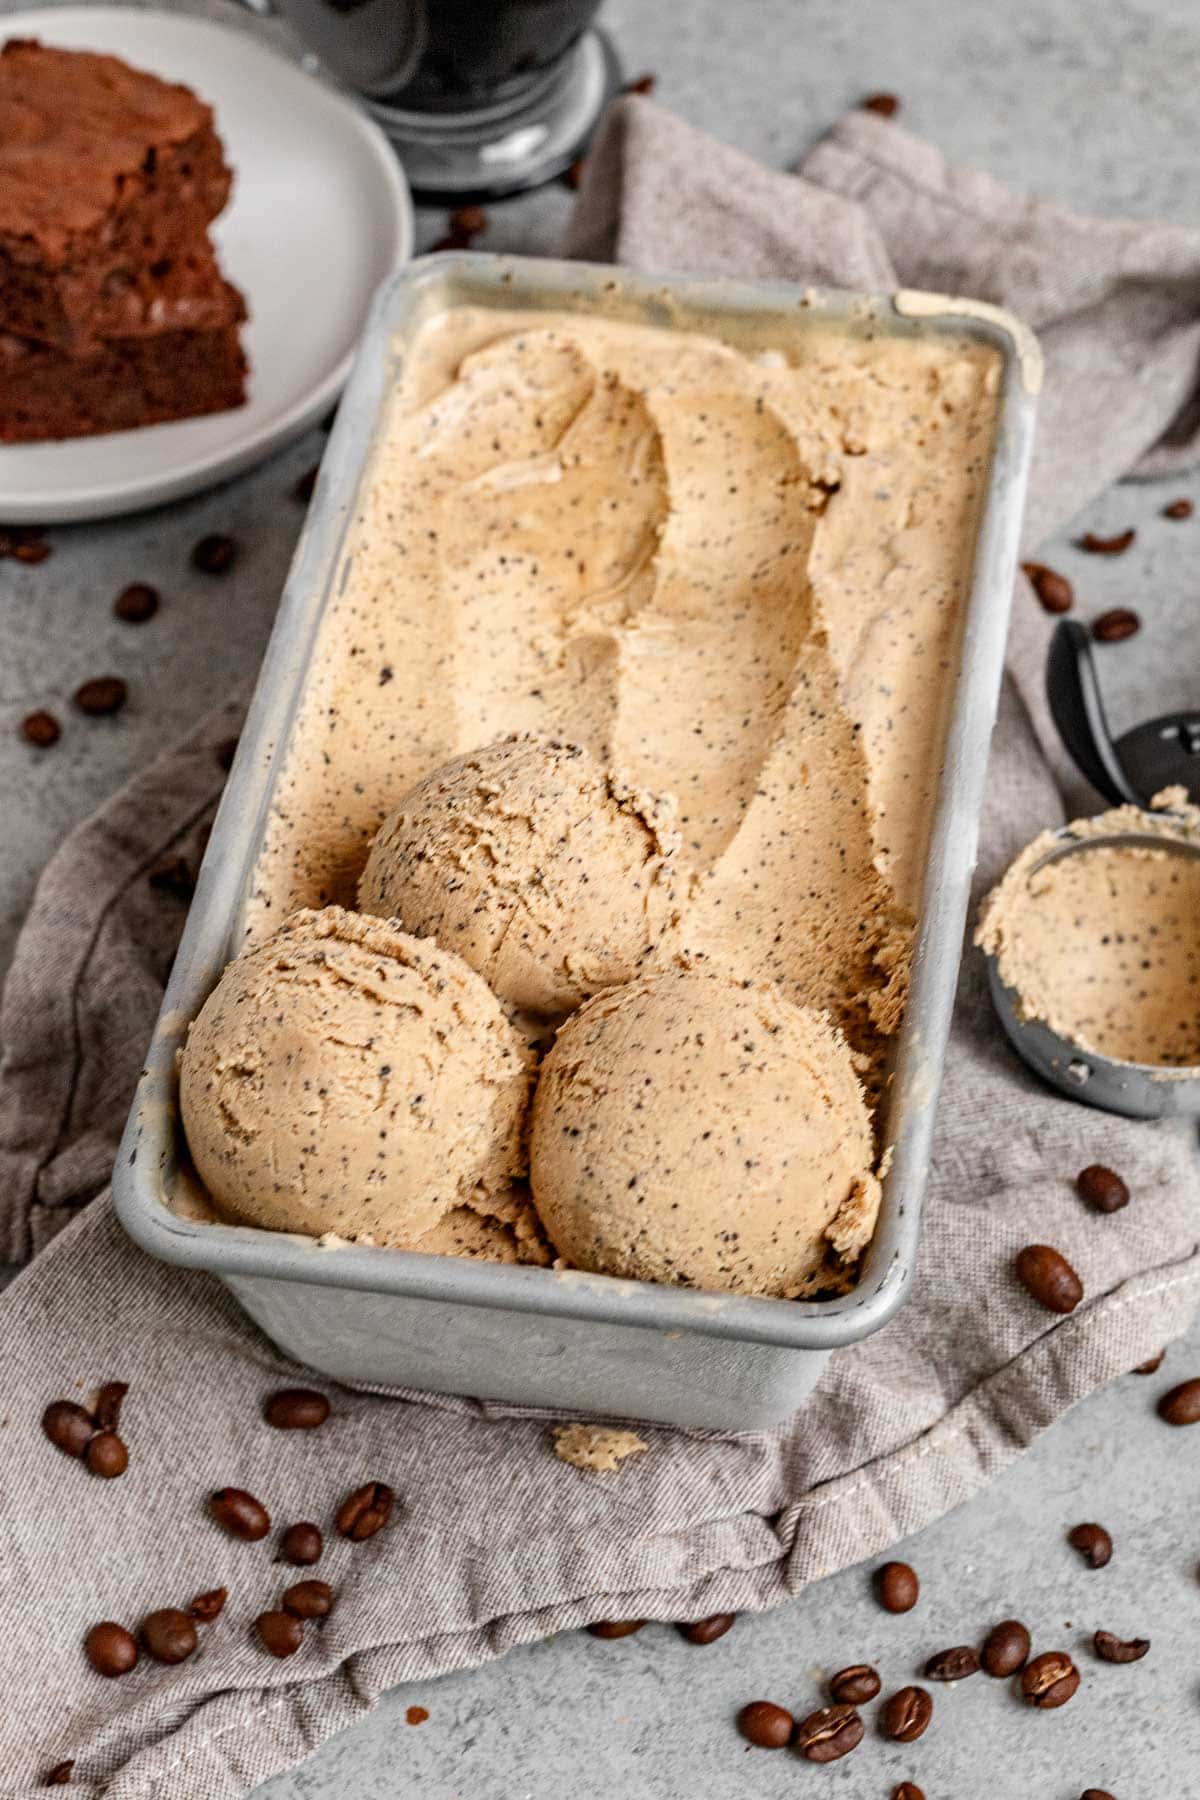 Coffee Ice Cream scoops in serving dish